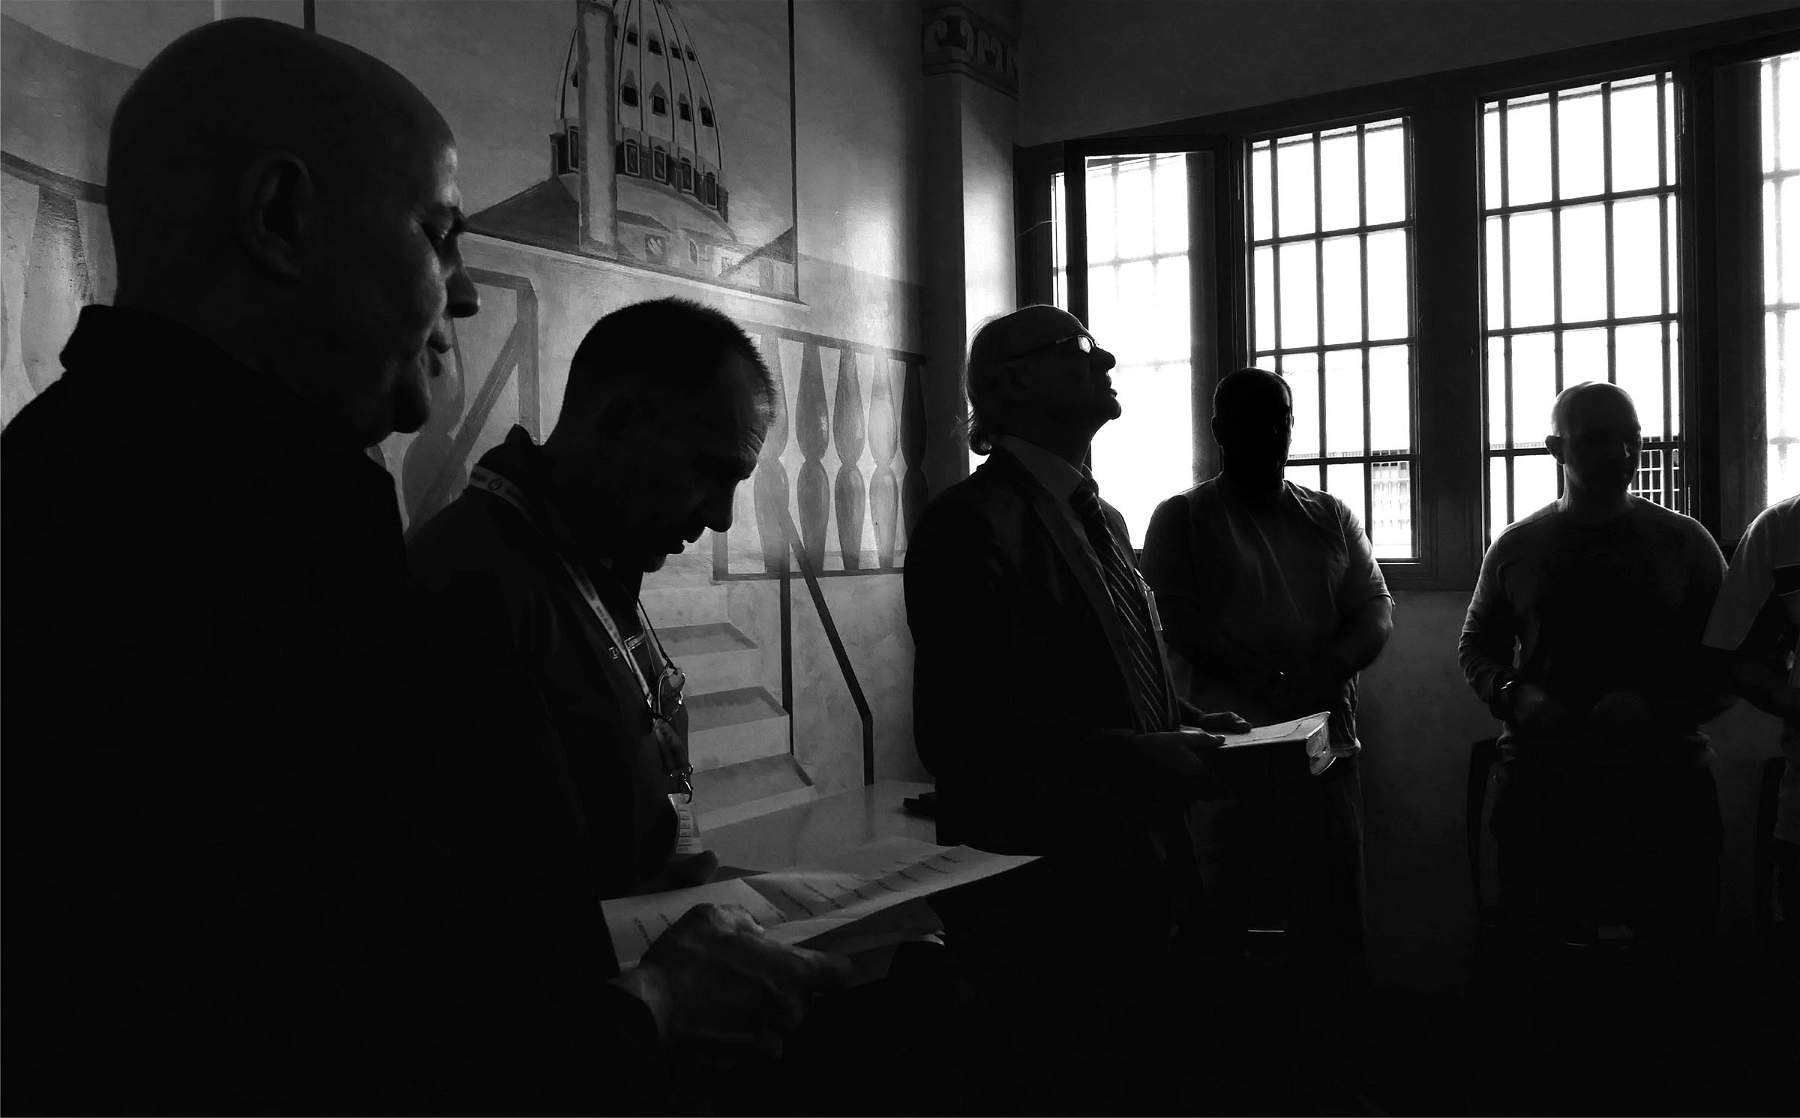 Prisoners' exercise of faith in prison: at the Diocesan Museum in Milan, Margherita Lazzati's photographs